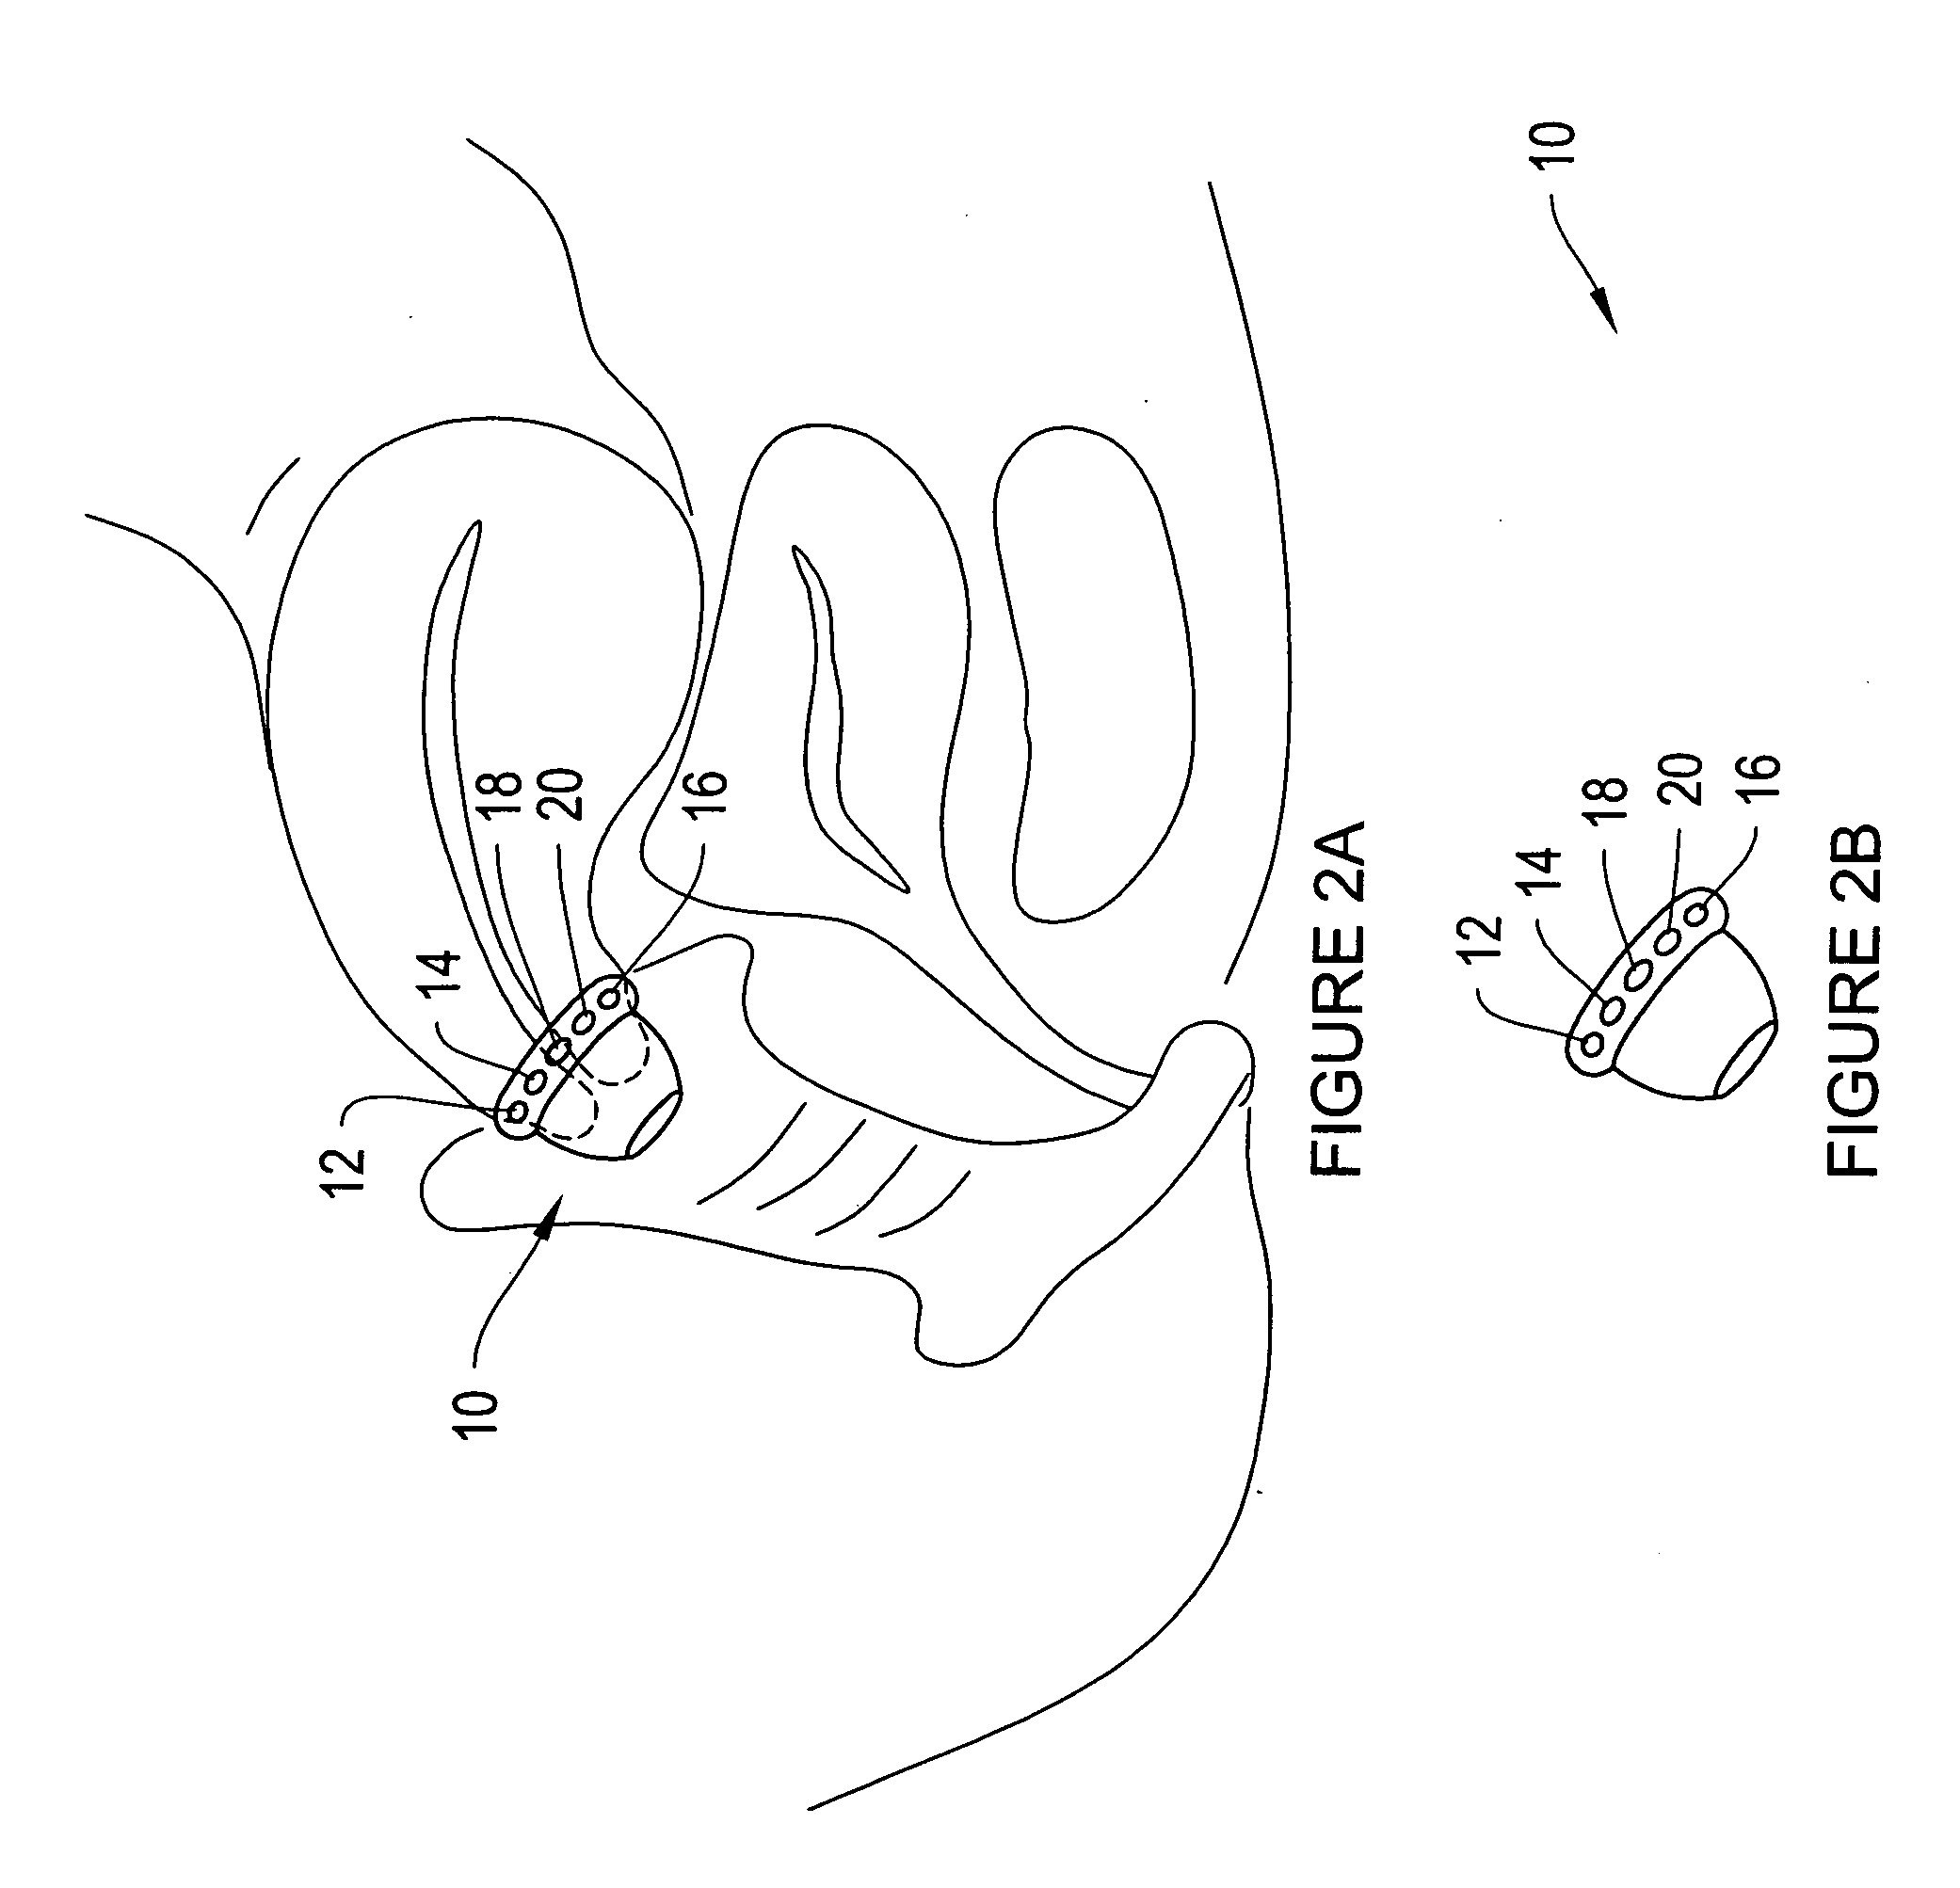 Systems and methods for a pregnancy monitoring device